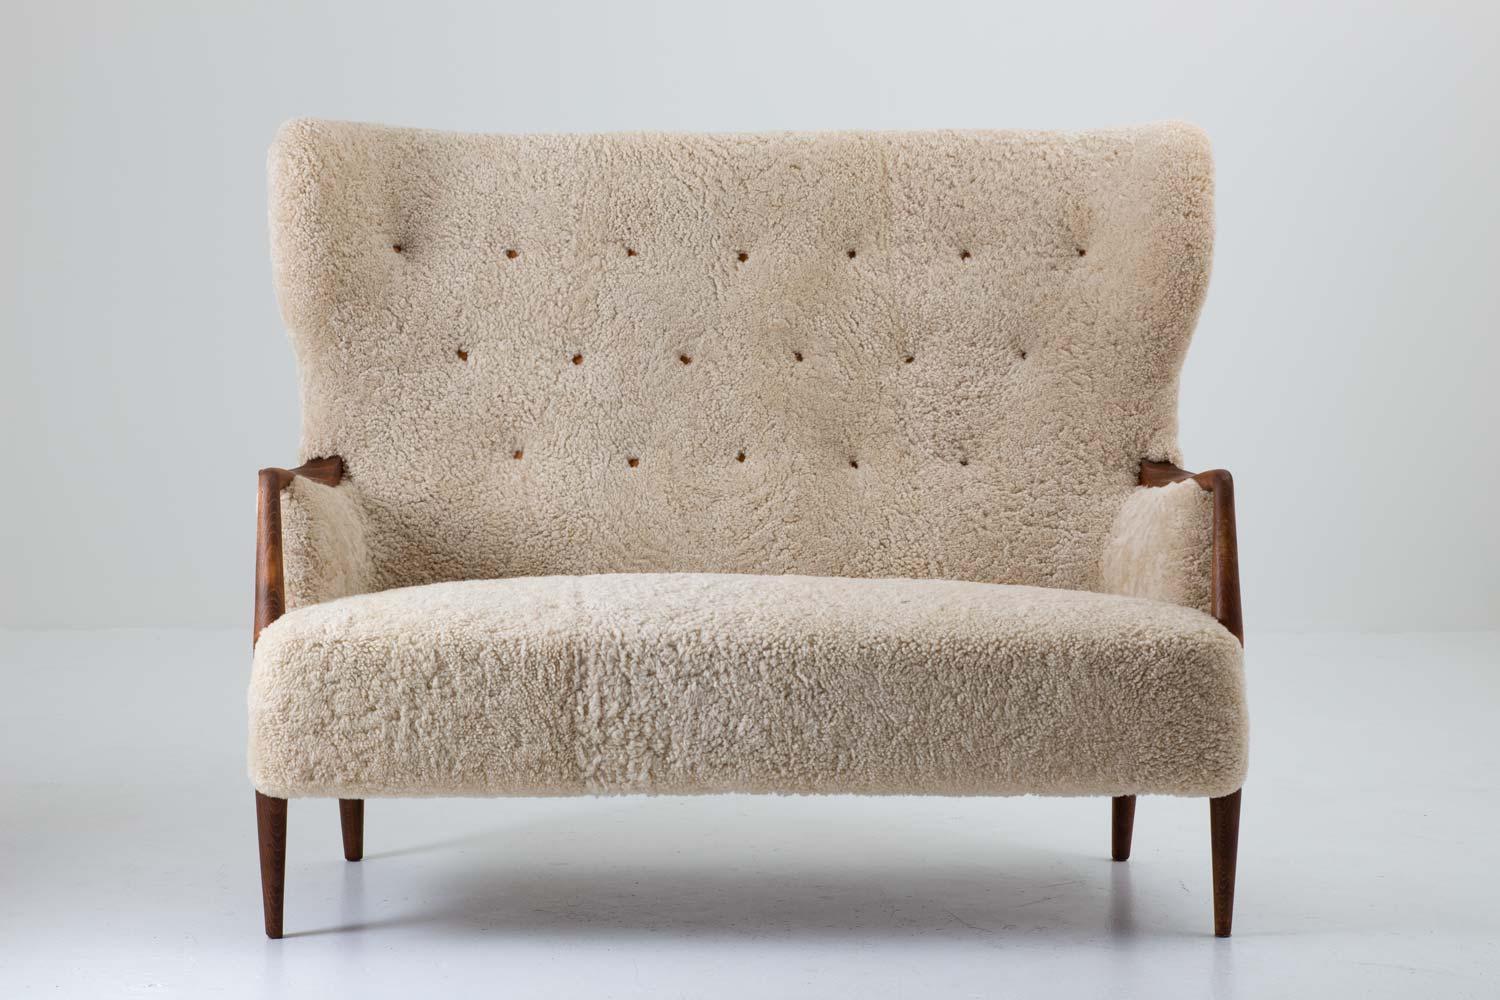 Stunning 2-seat sofa / loveseat produced in Denmark, circa 1940.
This wingback sofa is constructed with an impressive quality. The proportions and shapes are made with a great sense for design and the wooden details contribute to the exclusive